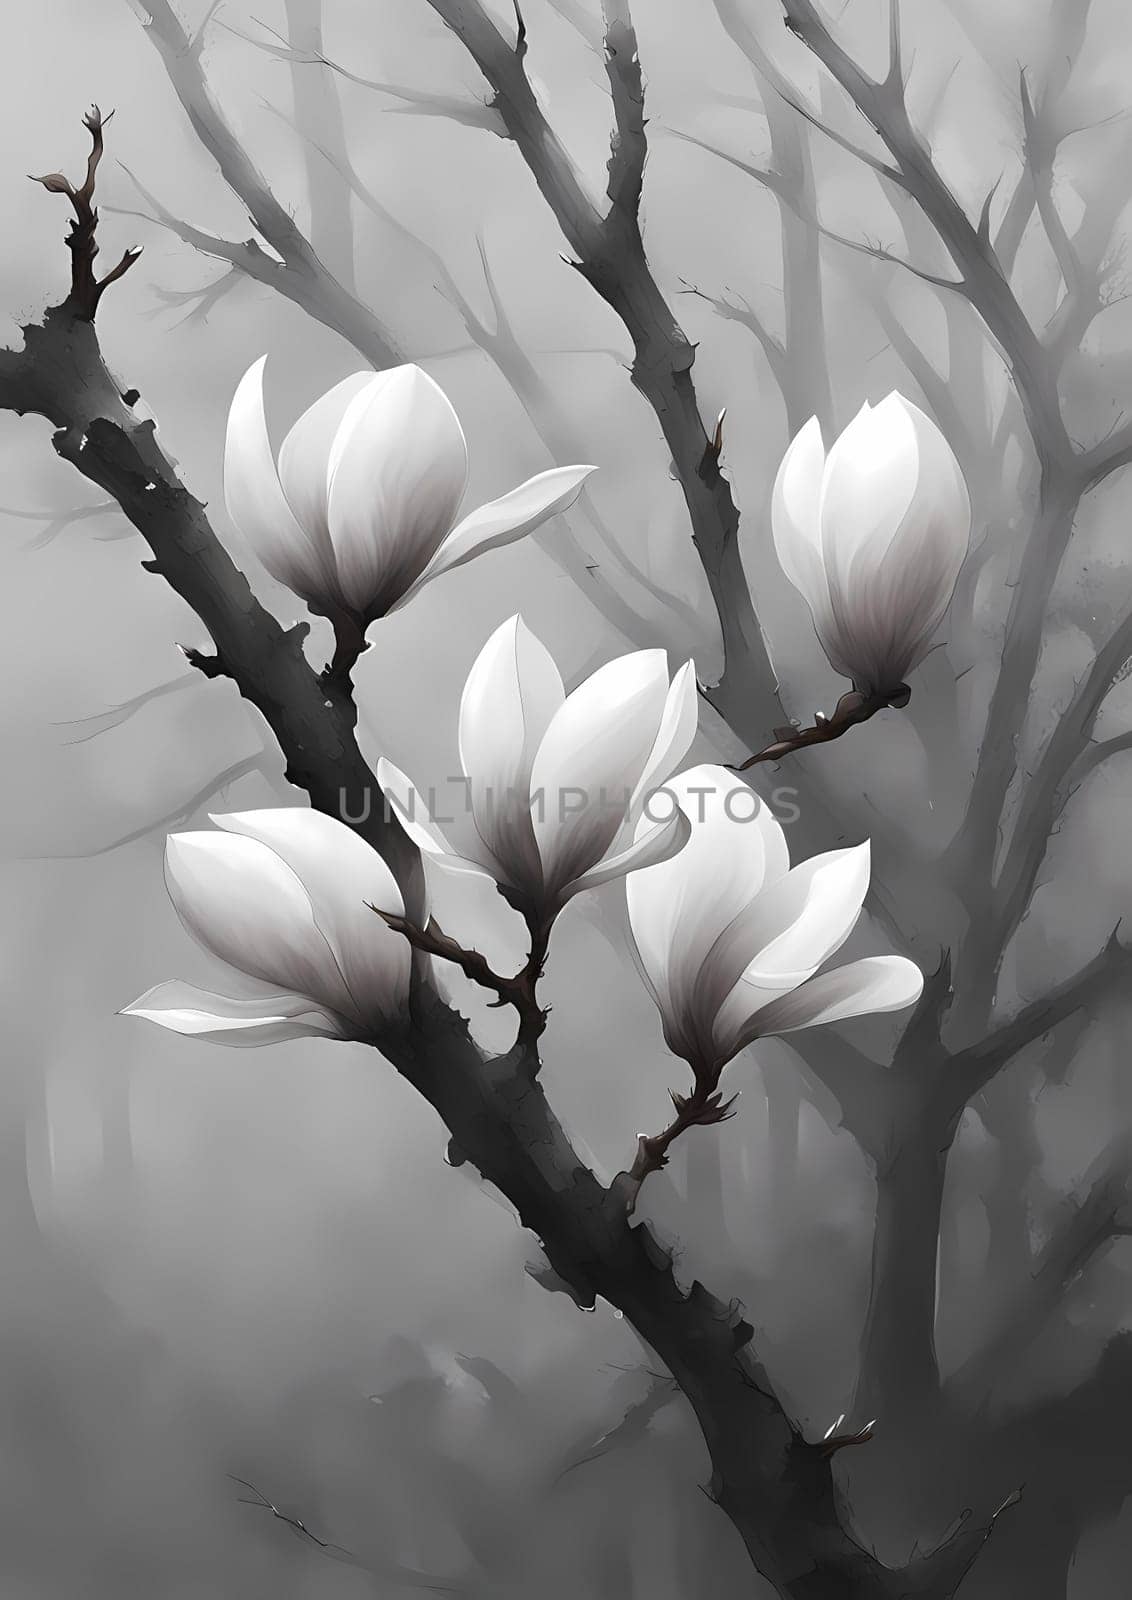 against the misty sky are white flowers on a branch, high detail, dark wood, march, magnolia stems, by rostik924